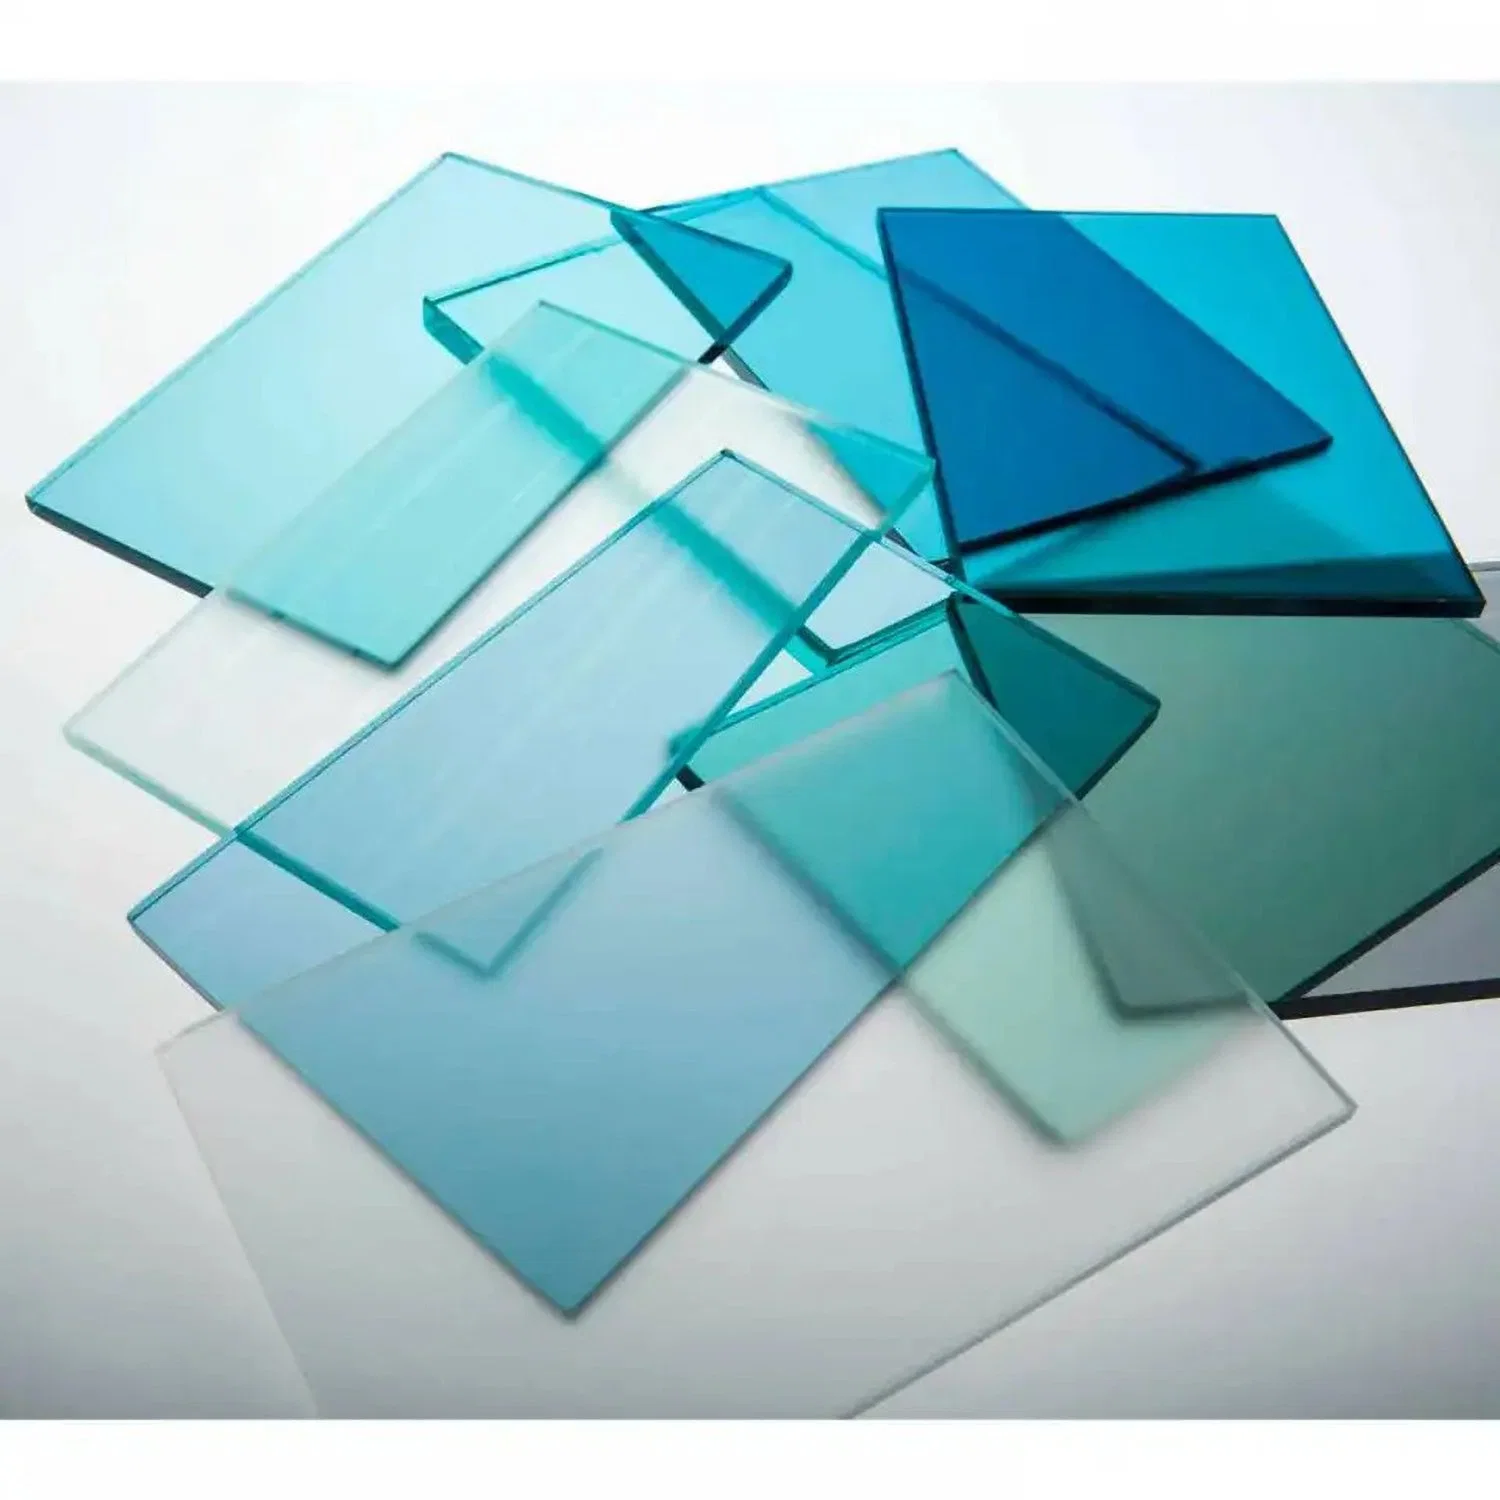 Ultra Clear / Tinted /Float/ Sheet Glass Price for Buildings / Tempered/Toughened / Laminated /Windows /Bathroom / Decorative /Mirror